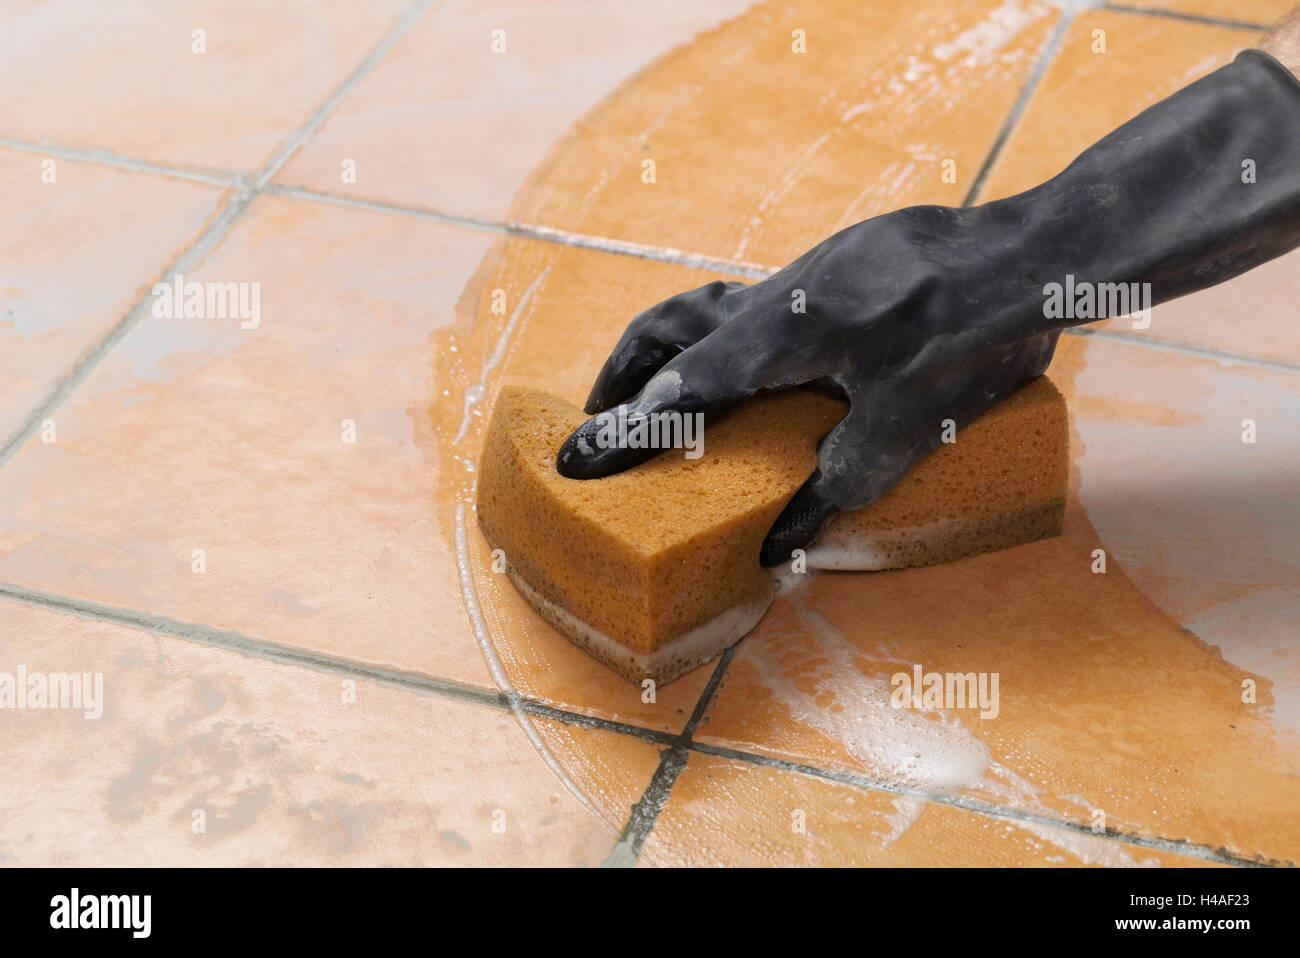 Building site, shell construction, tiles, lay, man, hand, sponge, clean Stock Photo